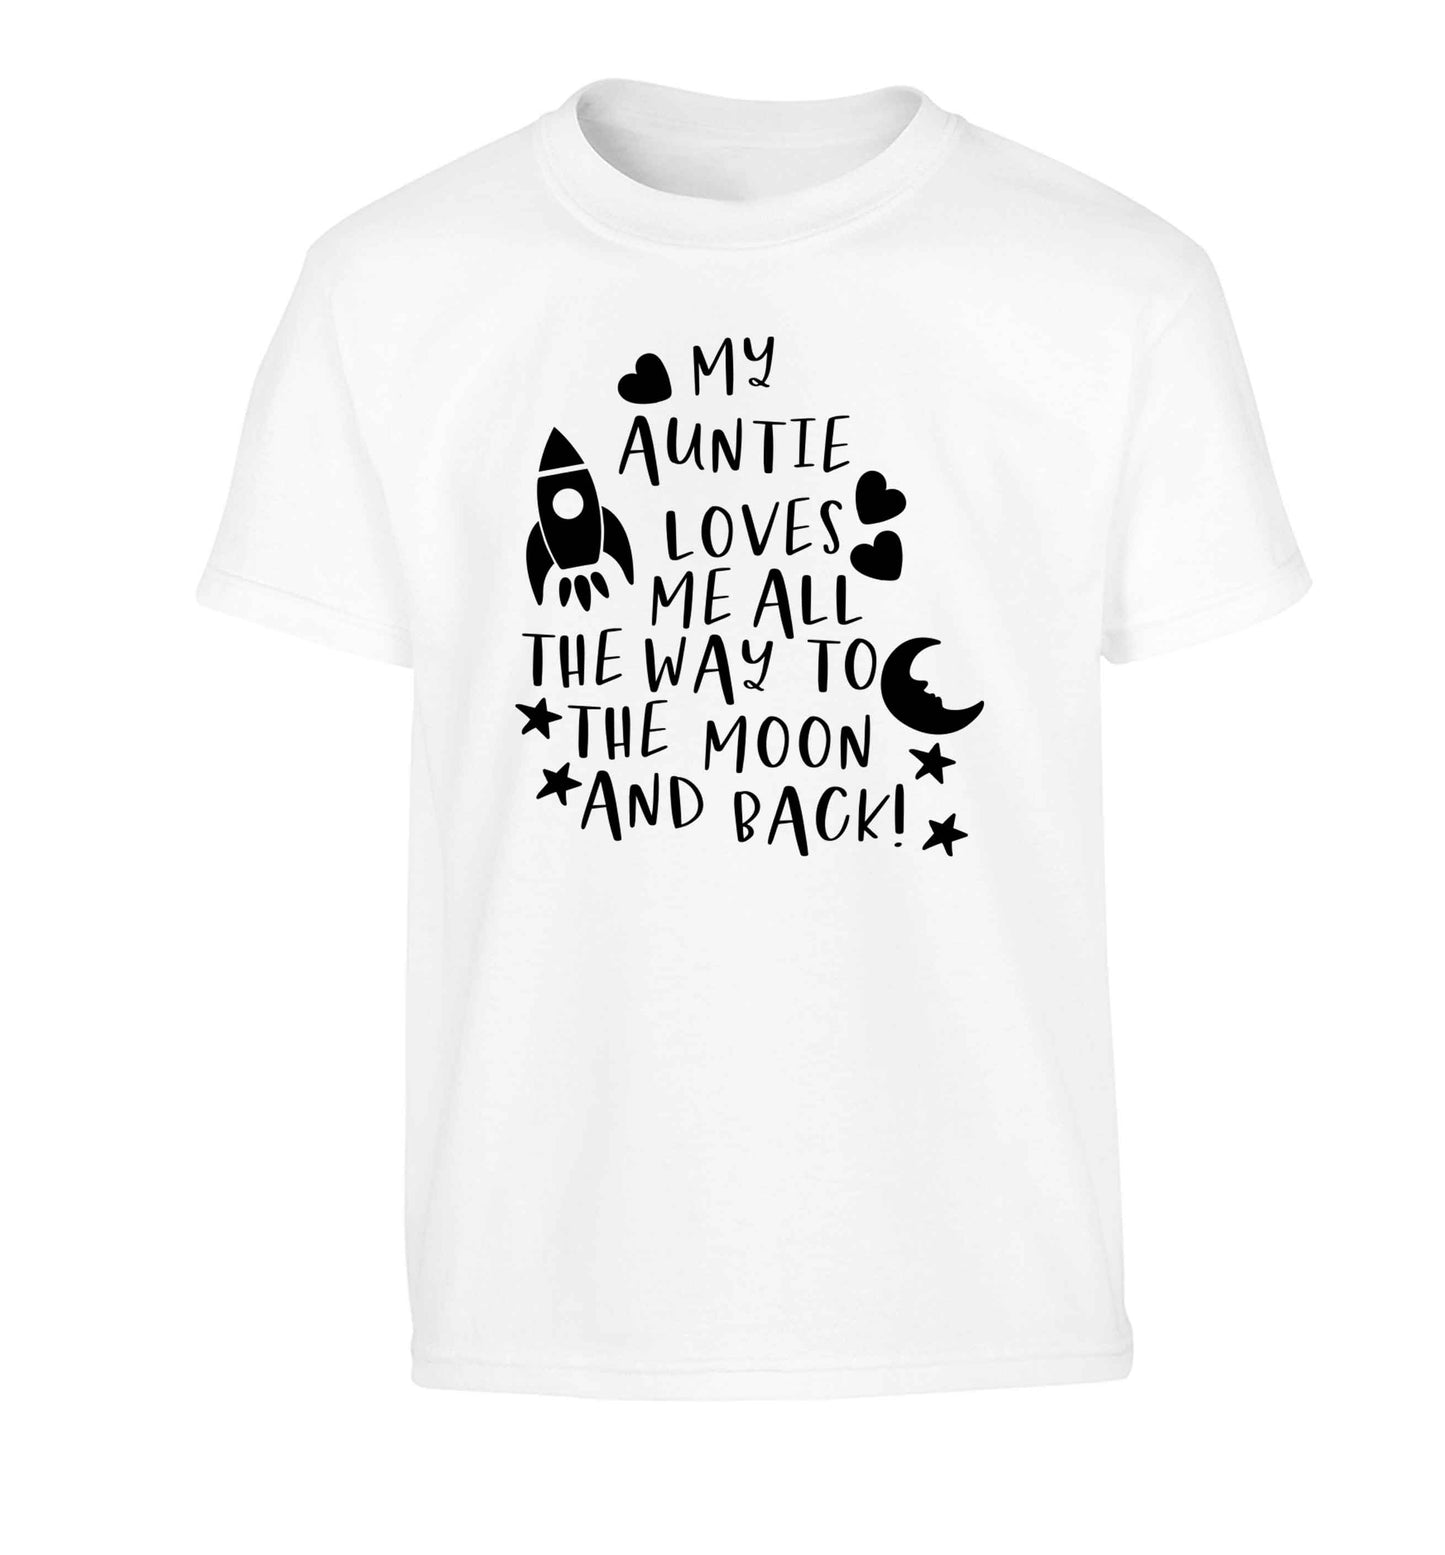 My auntie loves me all the way to the moon and back Children's white Tshirt 12-13 Years